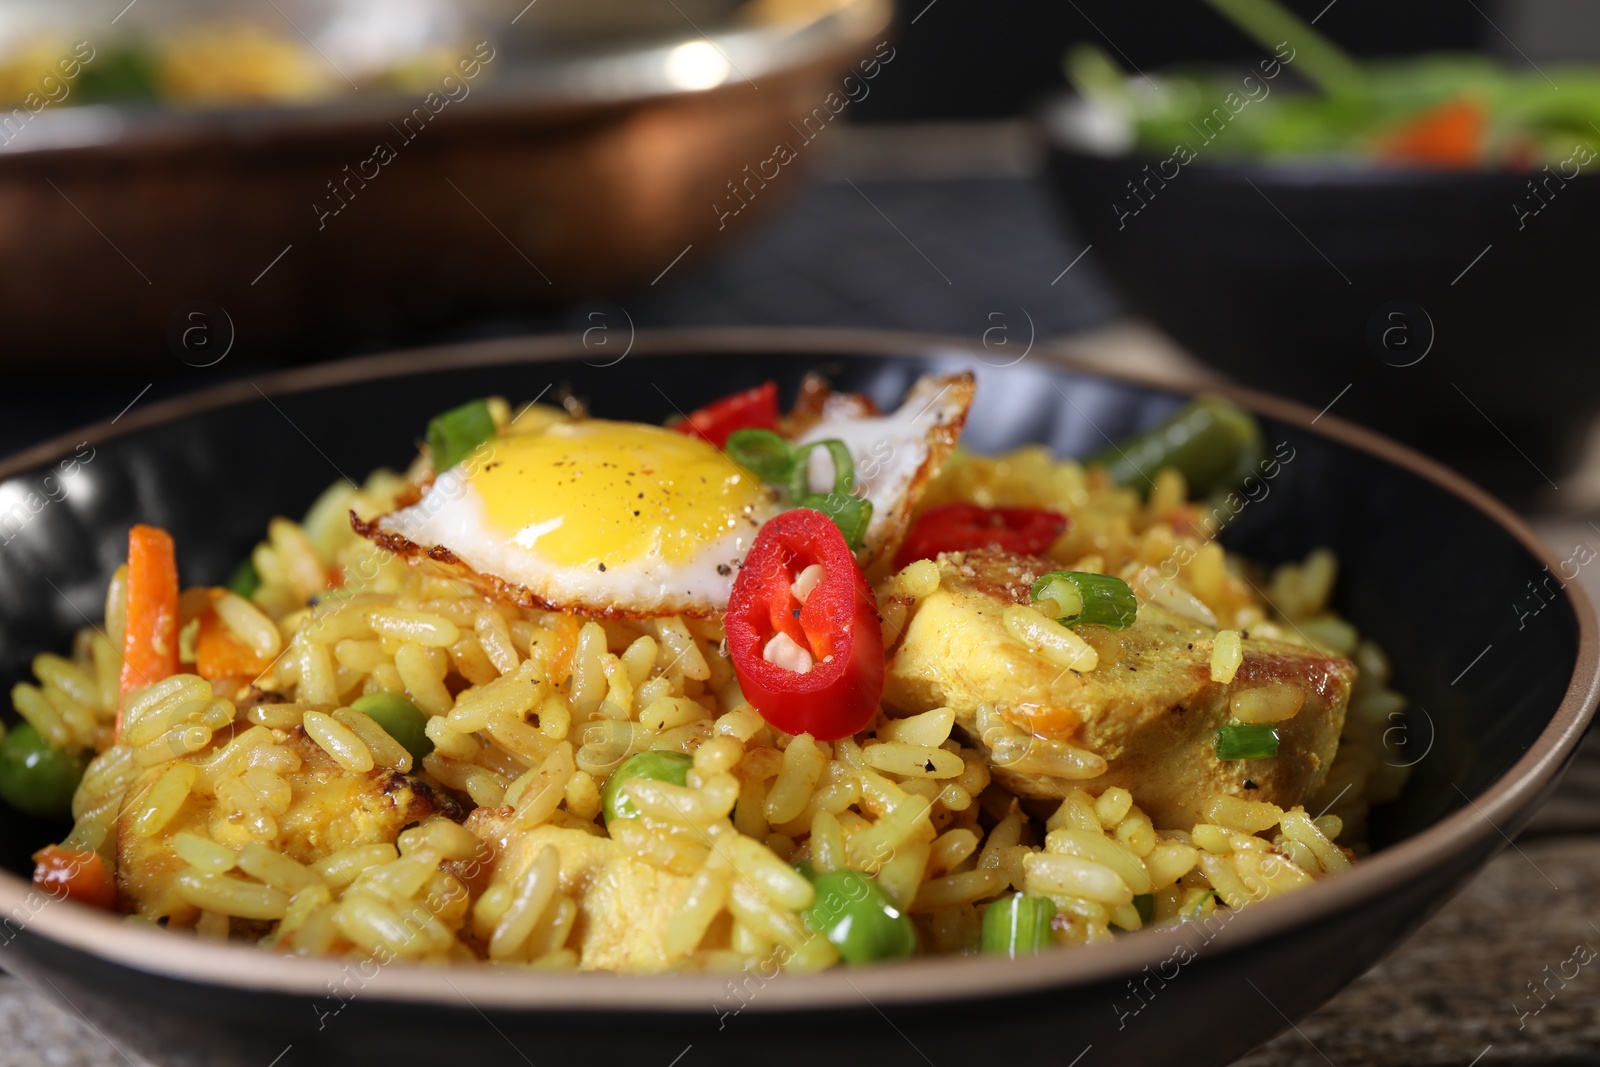 Photo of Tasty rice with meat, egg and vegetables in bowl on table, closeup